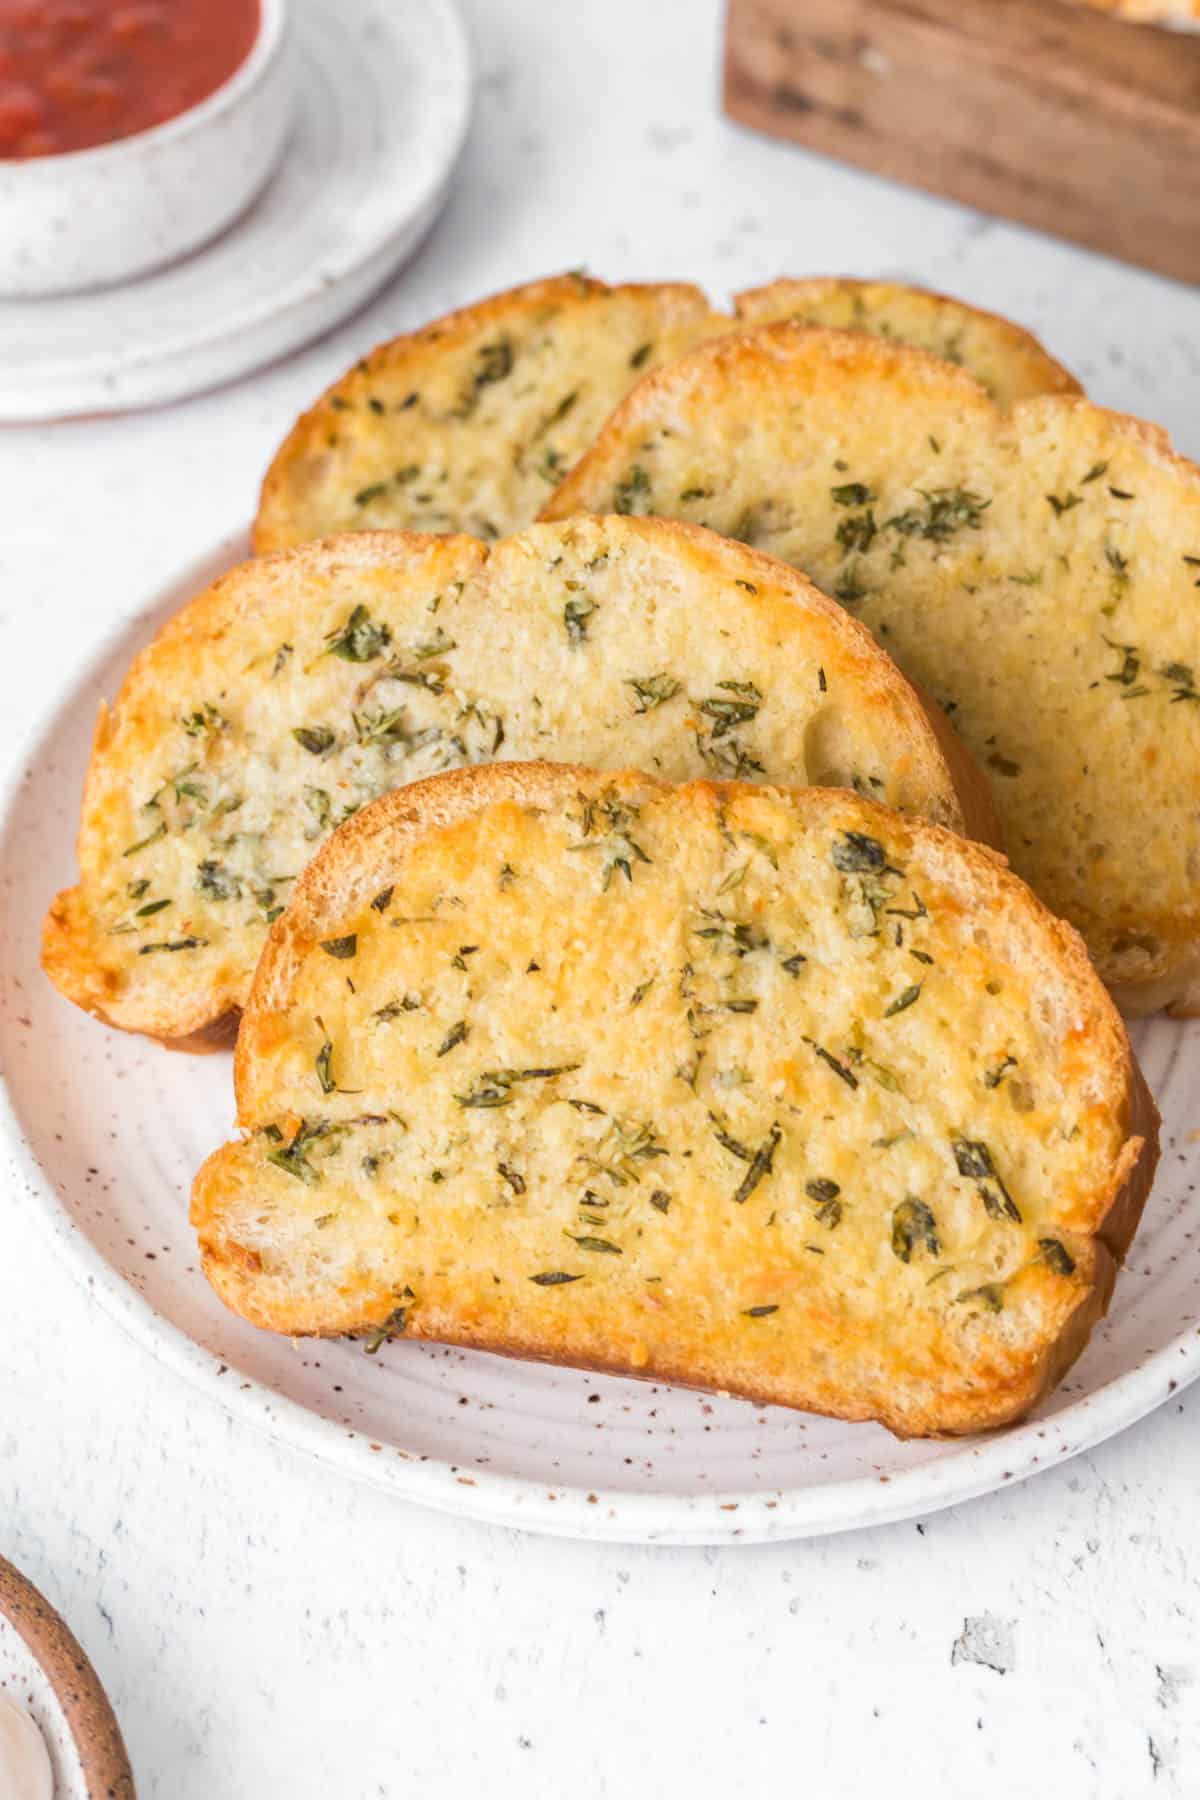 Slices of garlic bread on a plate.